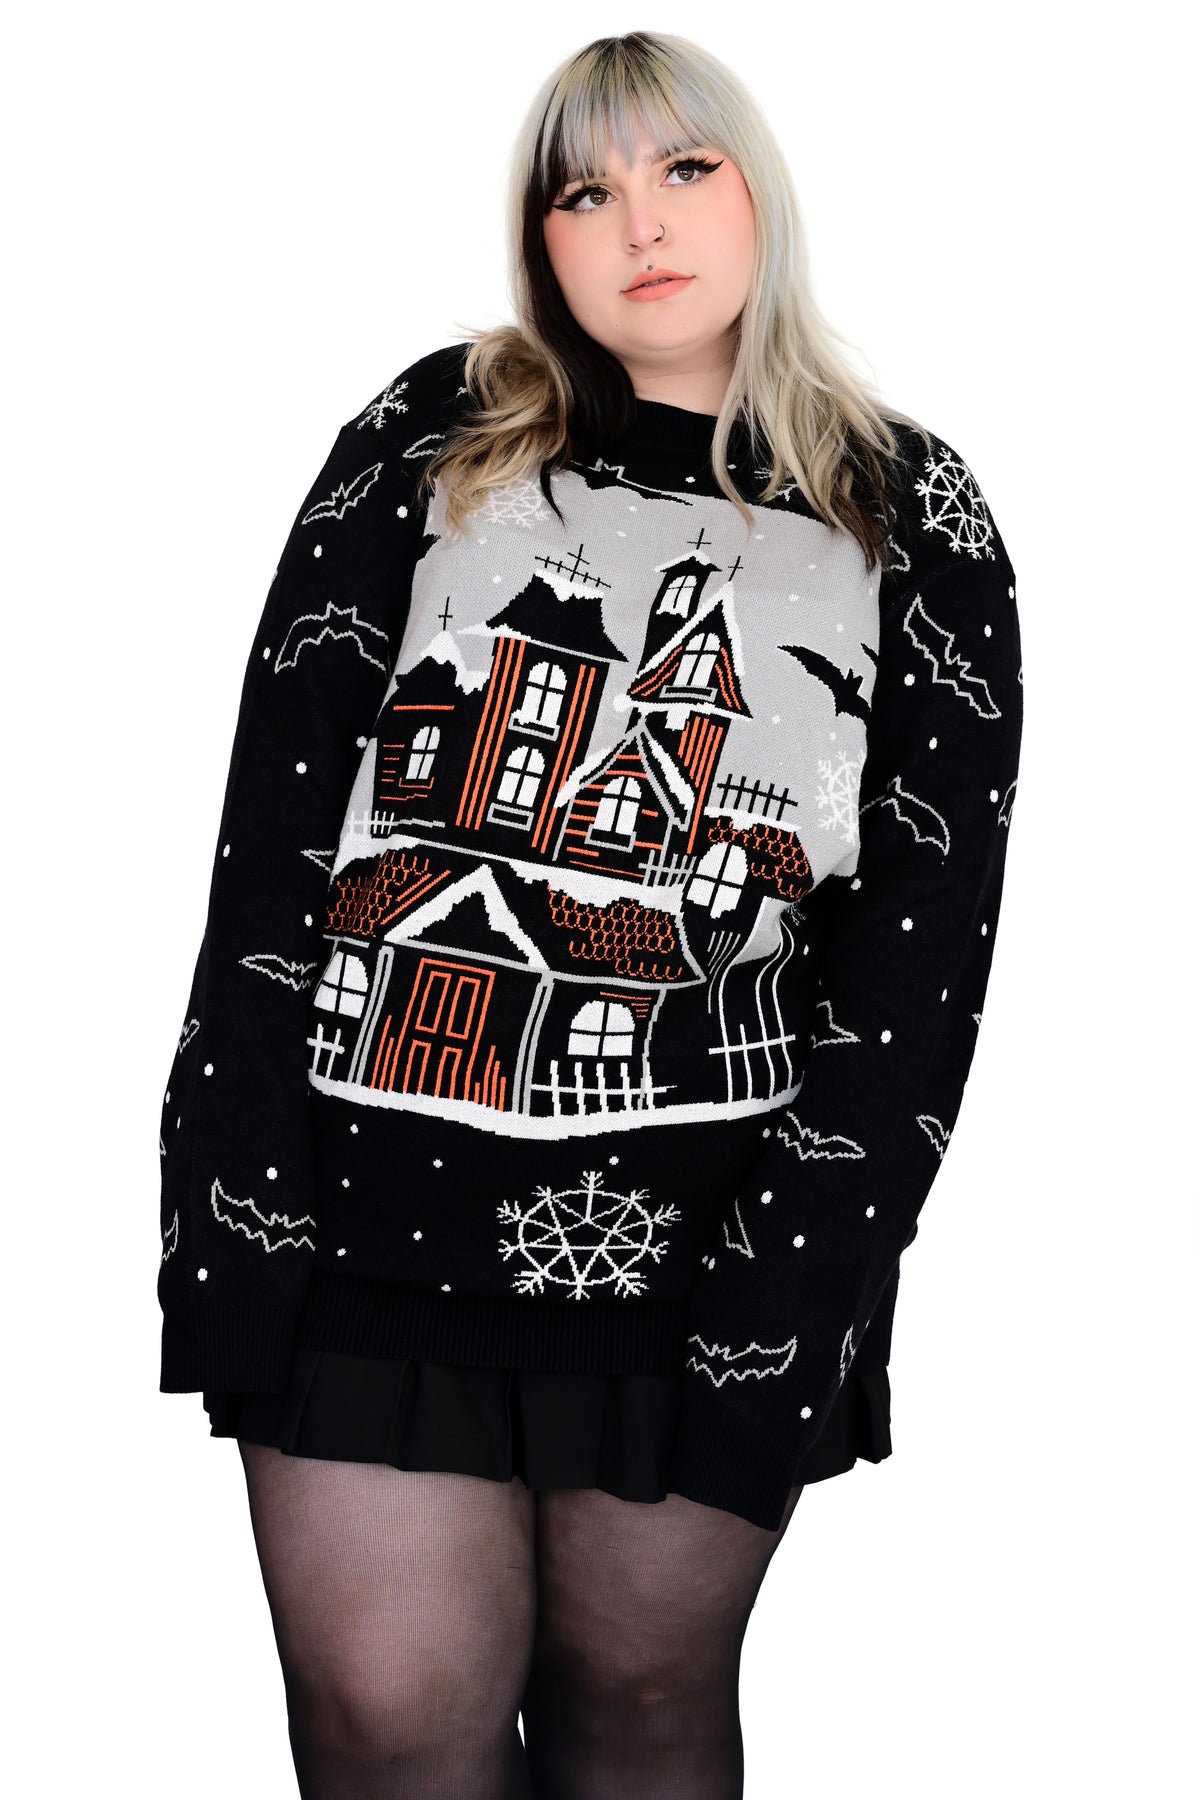 black pullover sweater with spooky snowglobe scene, bats, snow and snowflakes